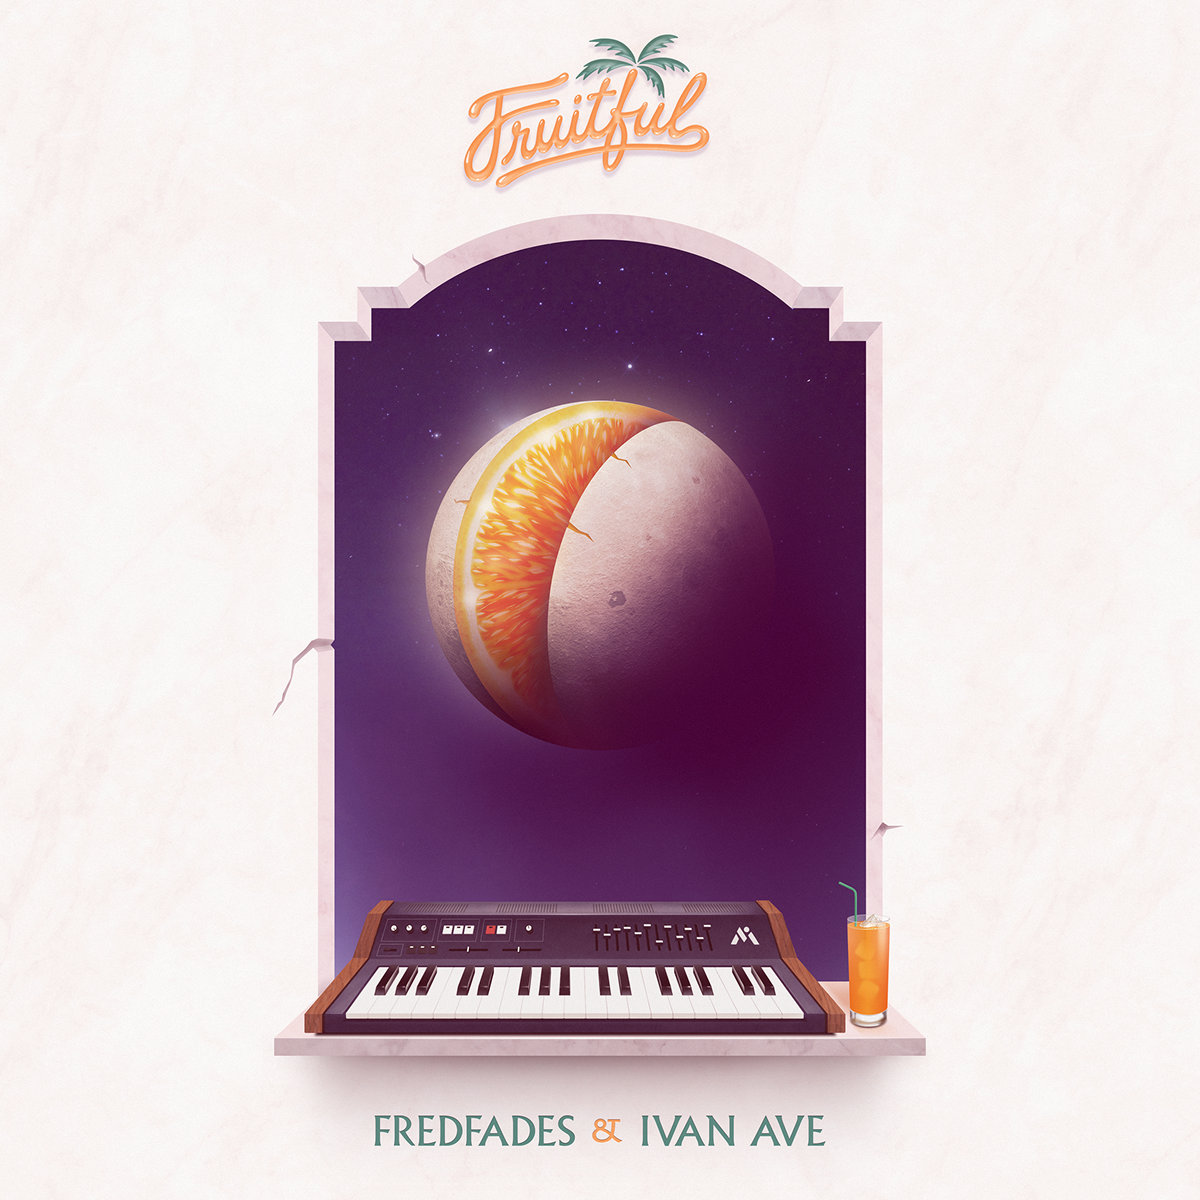 Fredfades & Ivan Ave - "Walking Home" (Video)